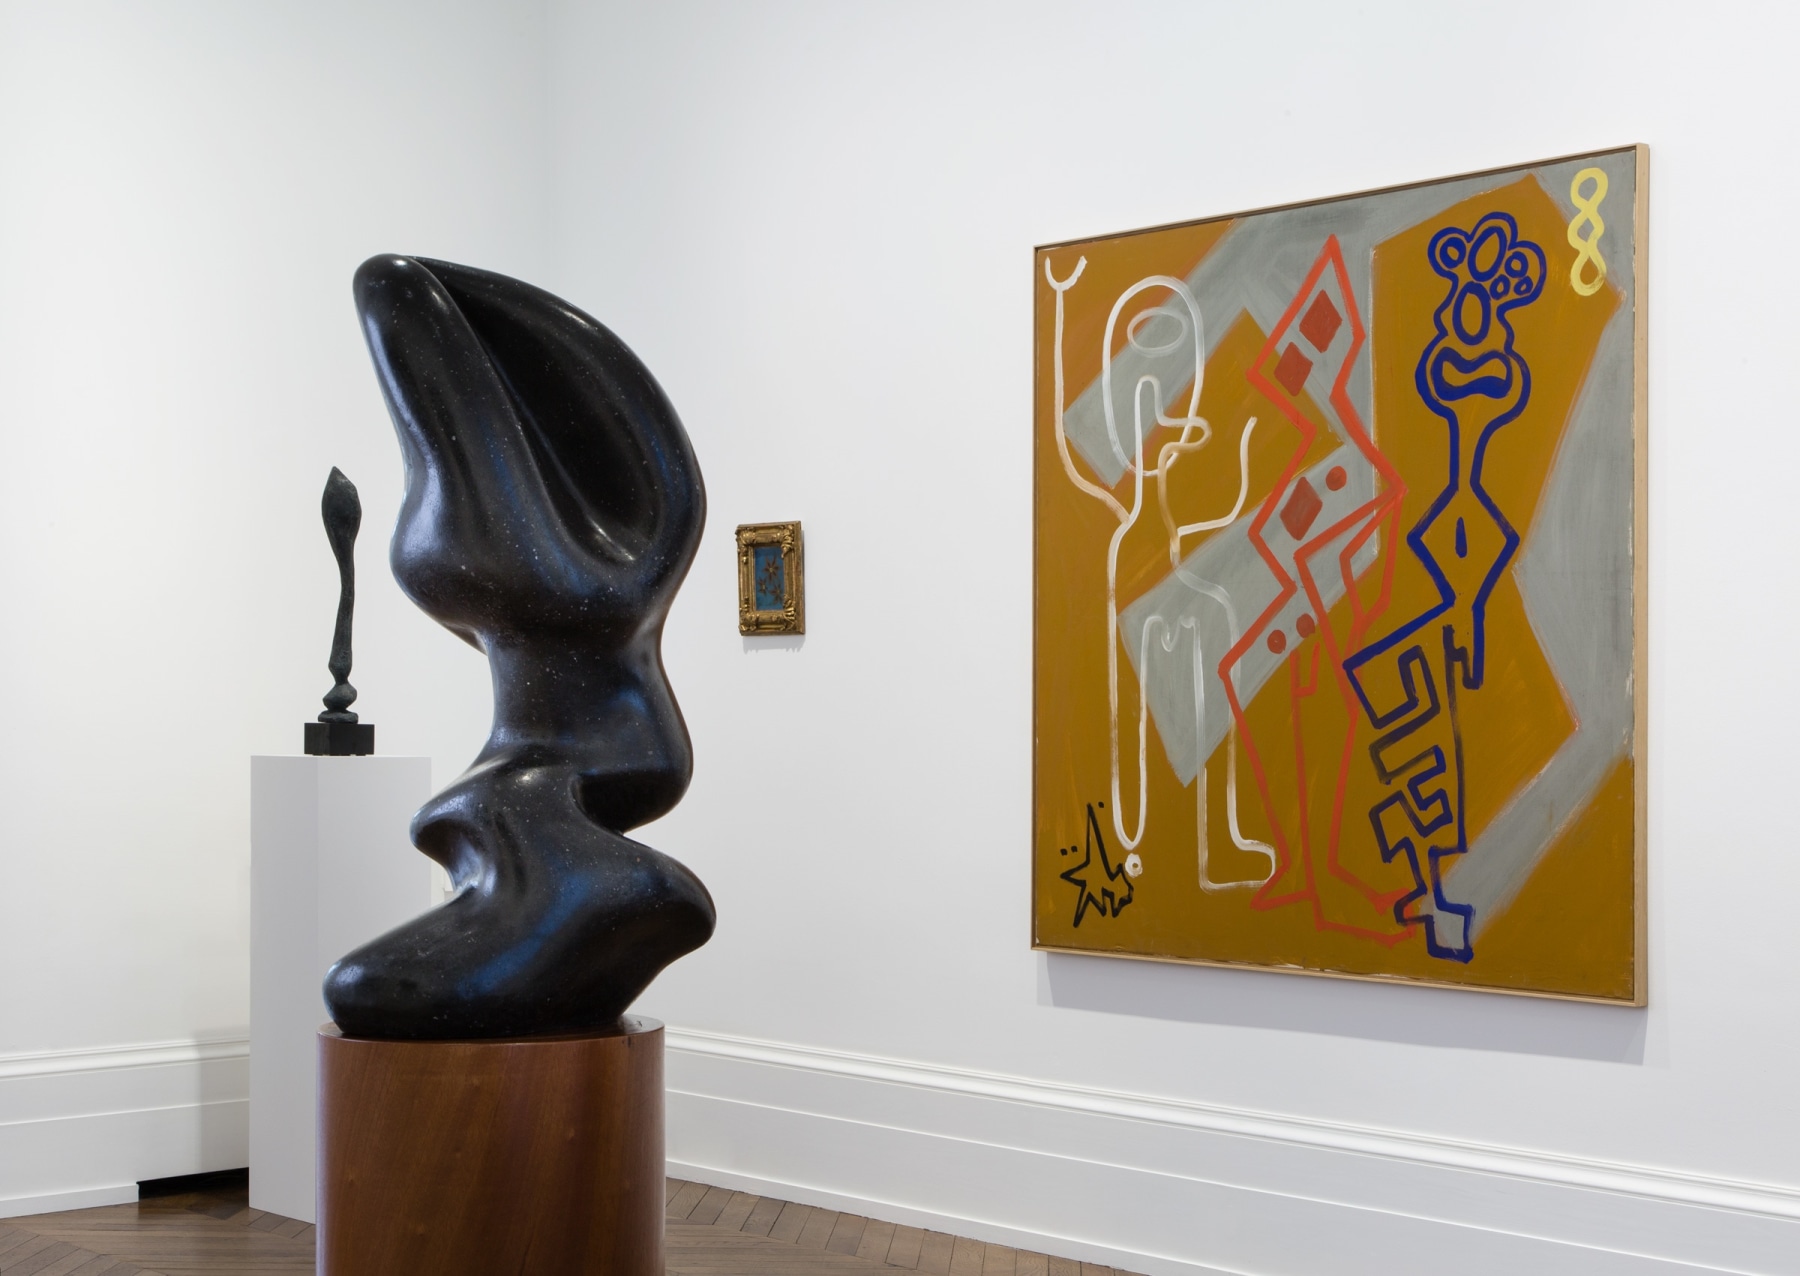 Art Basel OVR - Jean Arp, Enrico David, A.R. Penck: “The Human Figure” - Viewing Room - Michael Werner Gallery, New York and London